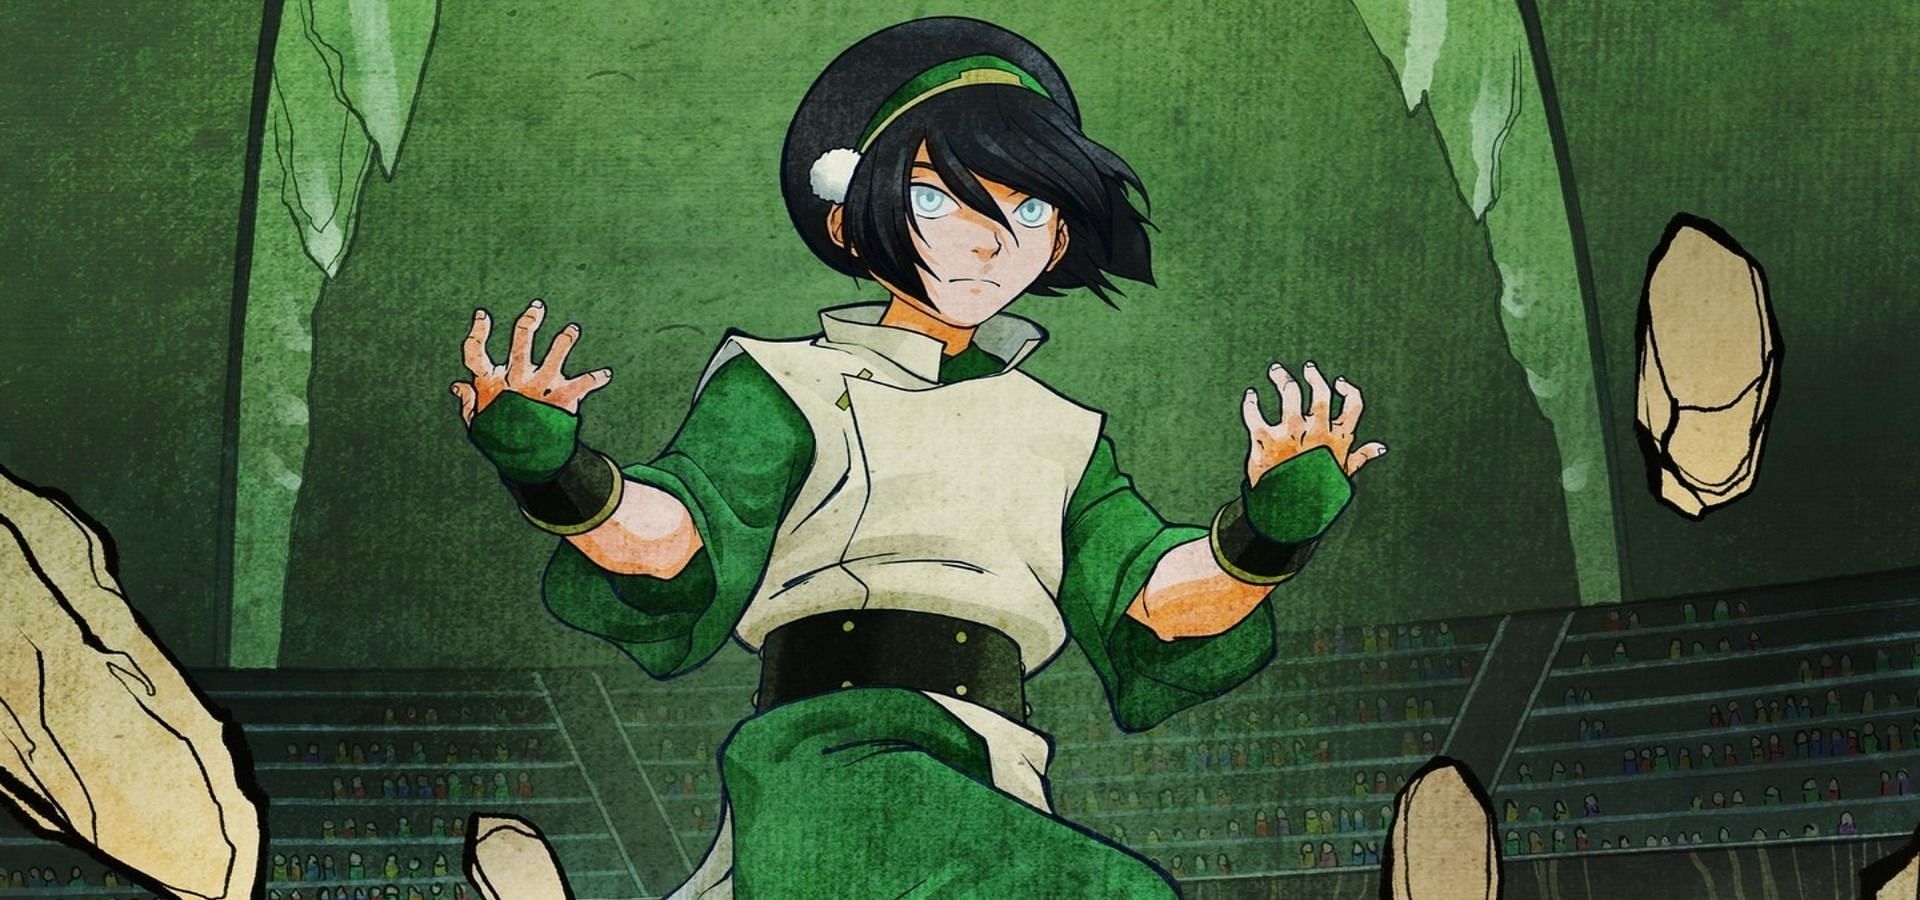 Toph, the character in Netflix